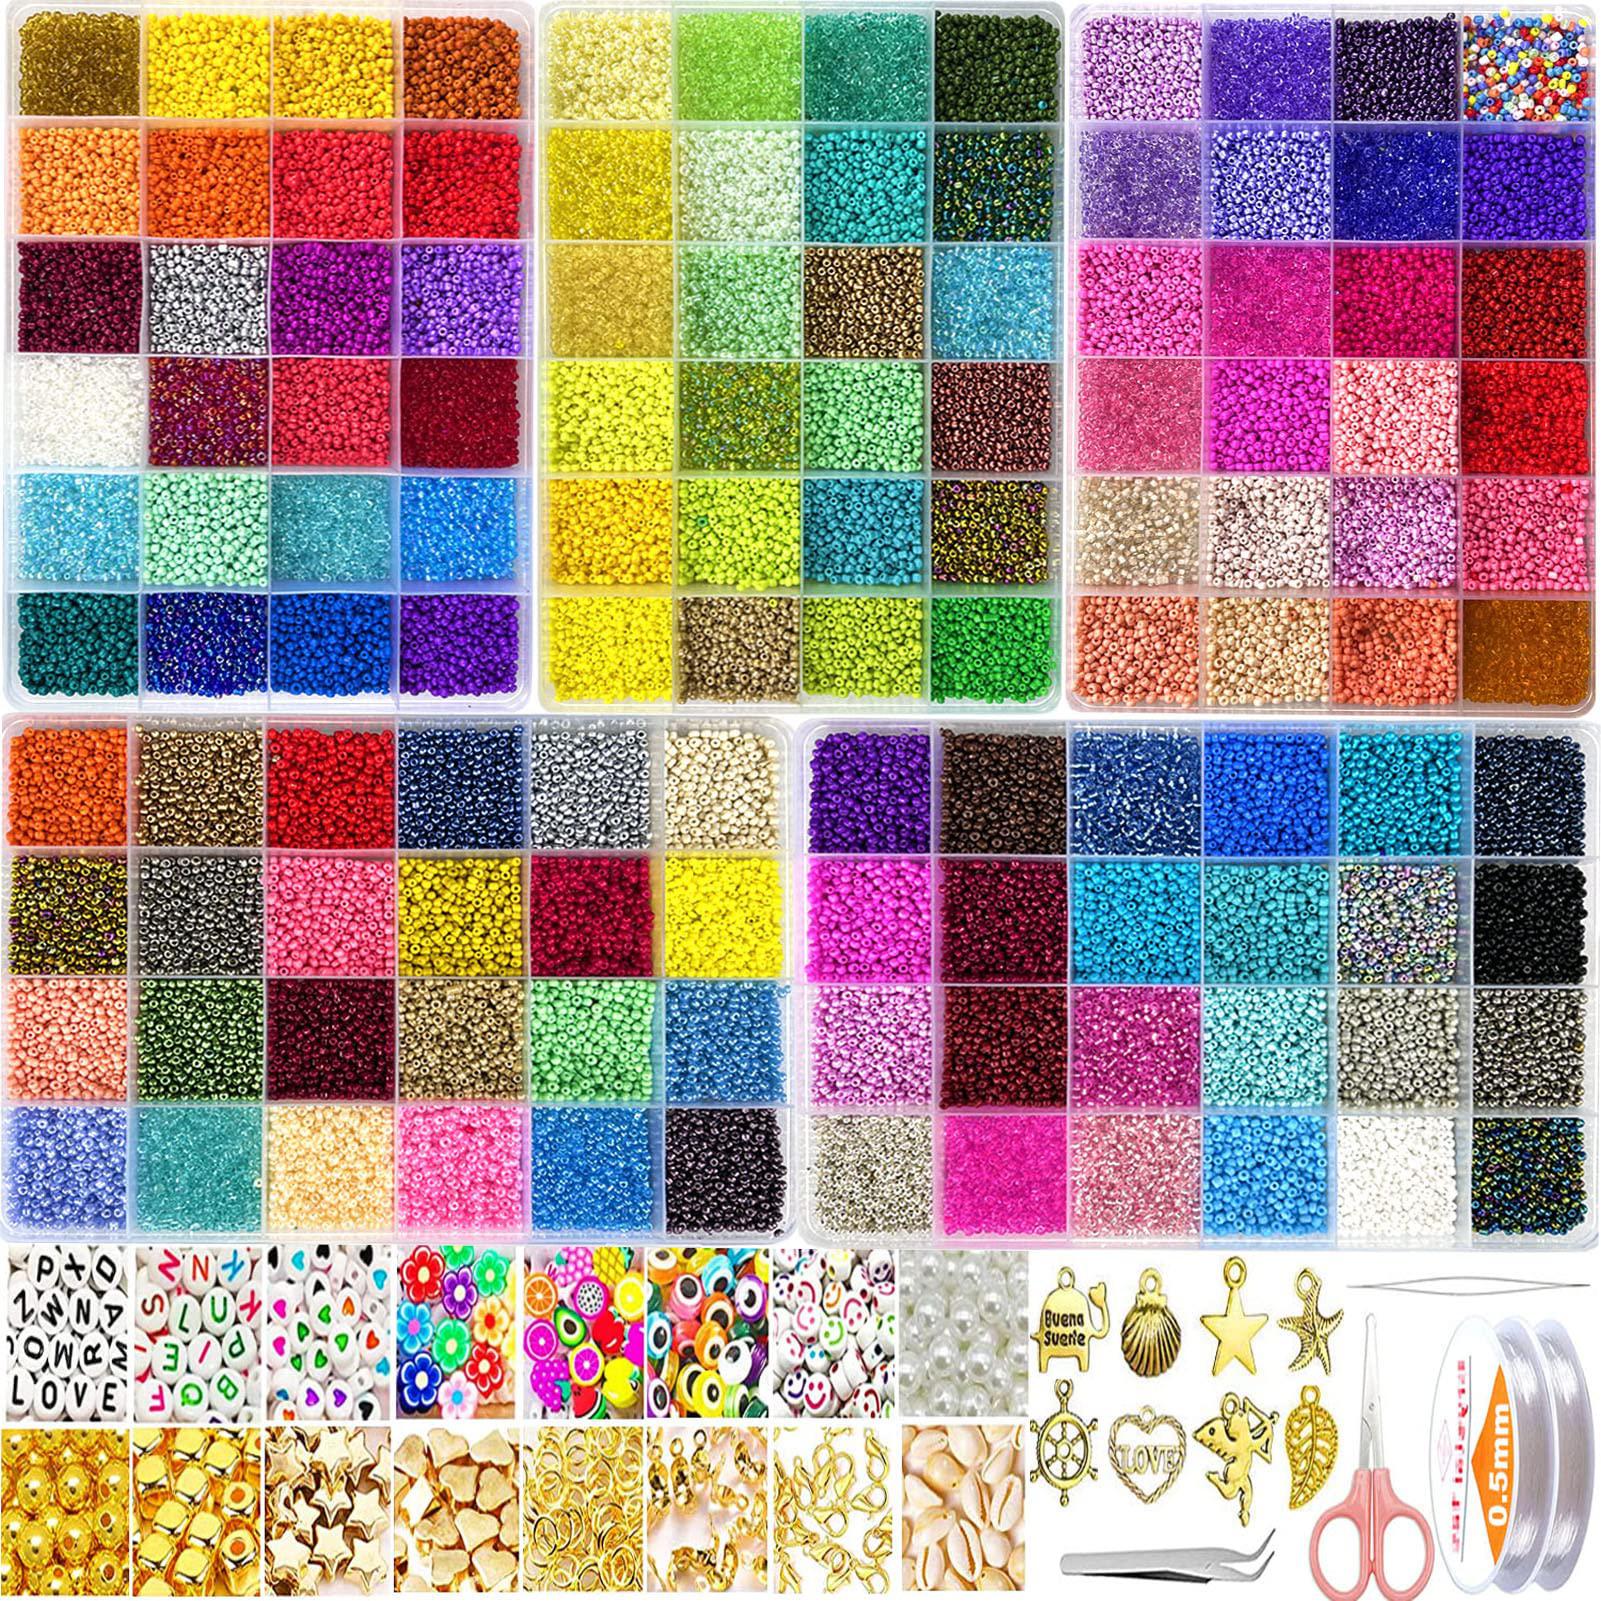 VTSHENY 54000pcs Glass Seed Beads for Jewelry Making Kit 120 Colors 2mm Small Beads Kit Bracelet Beads with Letter Evil Eye Beads Jump Rings & Charms Pendan